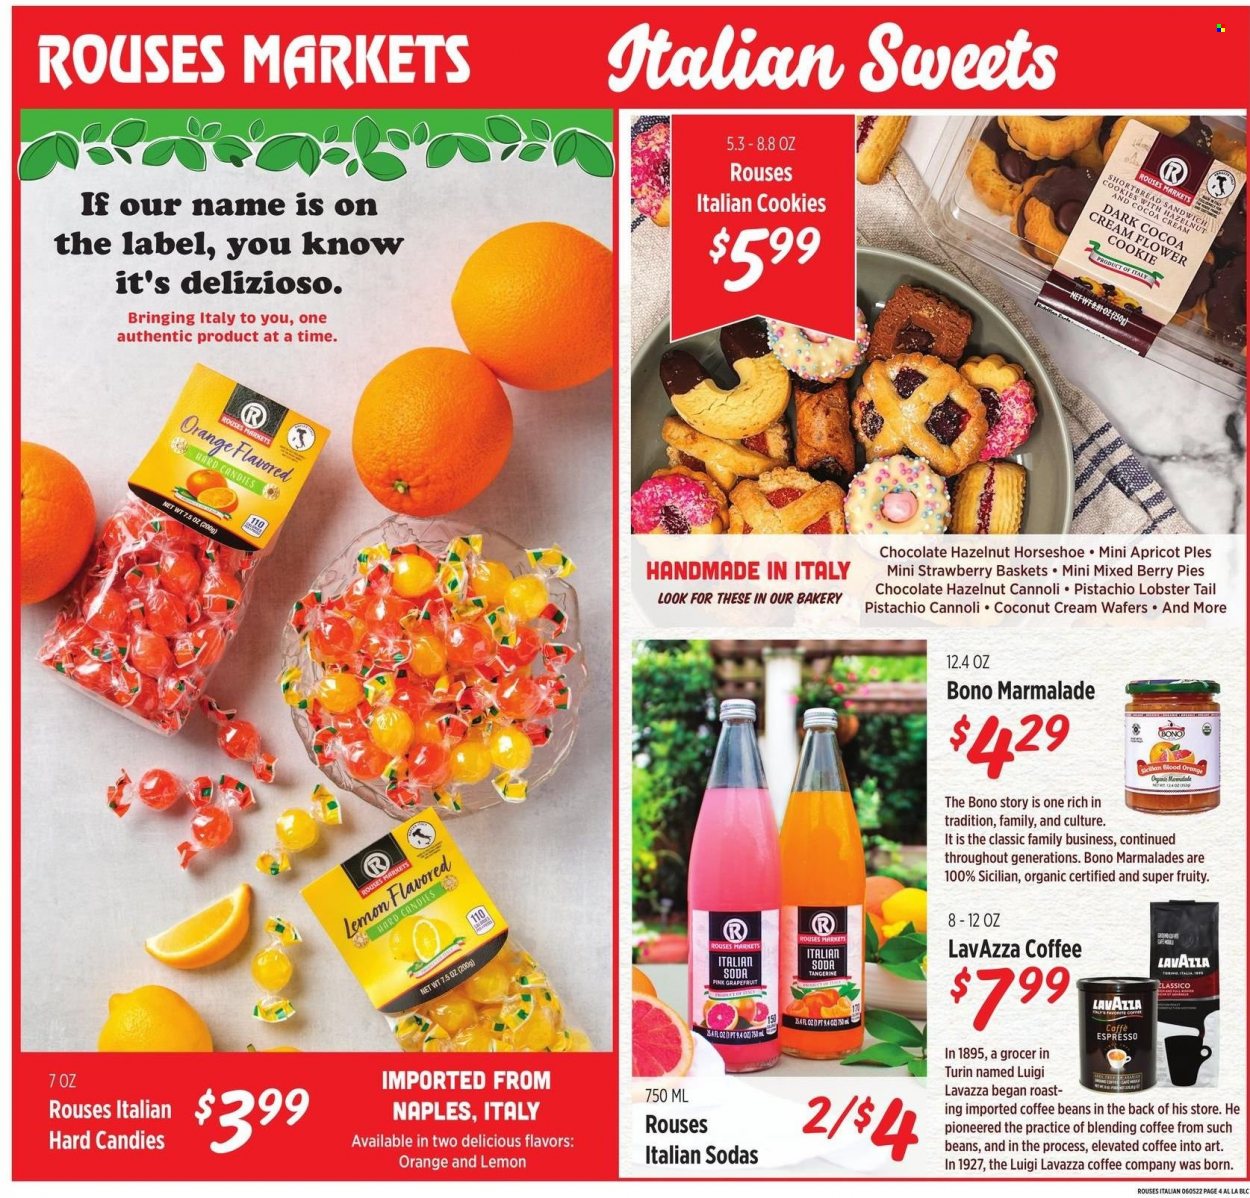 Rouses Markets ad  - 06.01.2022 - 06.29.2022.